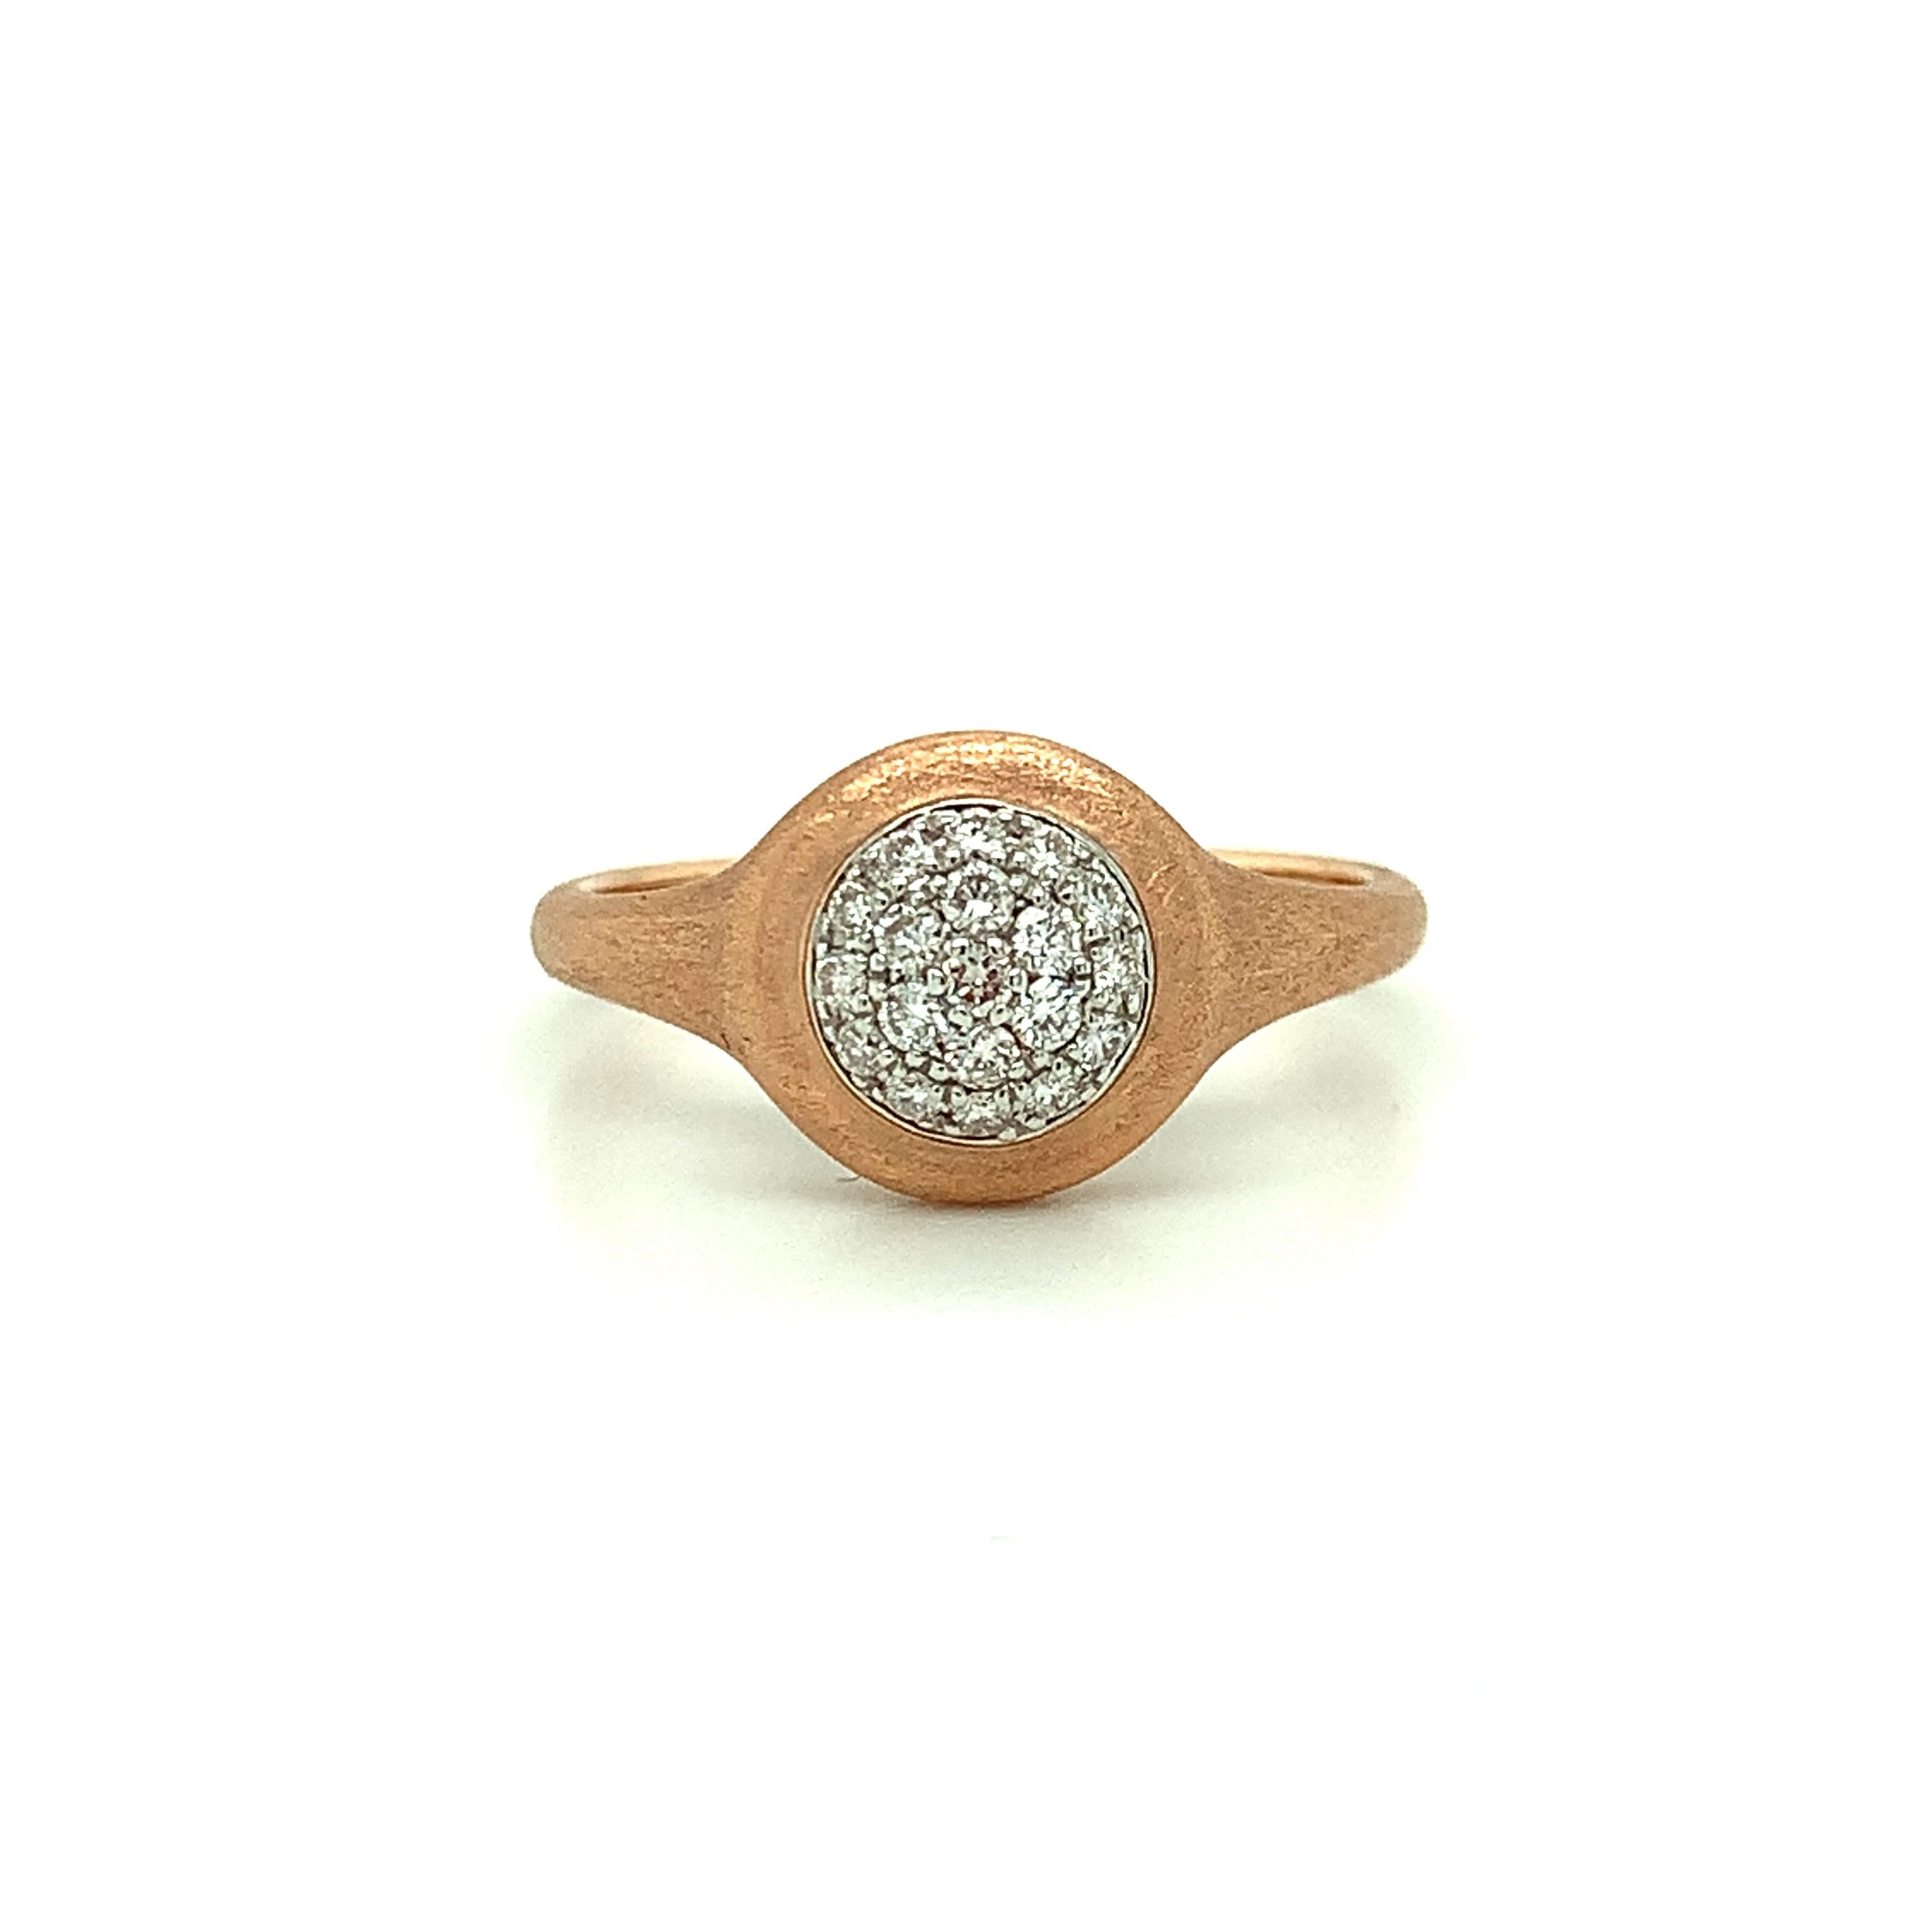 Simple and beautiful, this diamond and gold ring is perfect for everyday wear! Our pretty 14k rose gold ring has a gorgeous brushed finish and features sparkling round brilliant-cut white diamonds that have been pave set in a striking circular